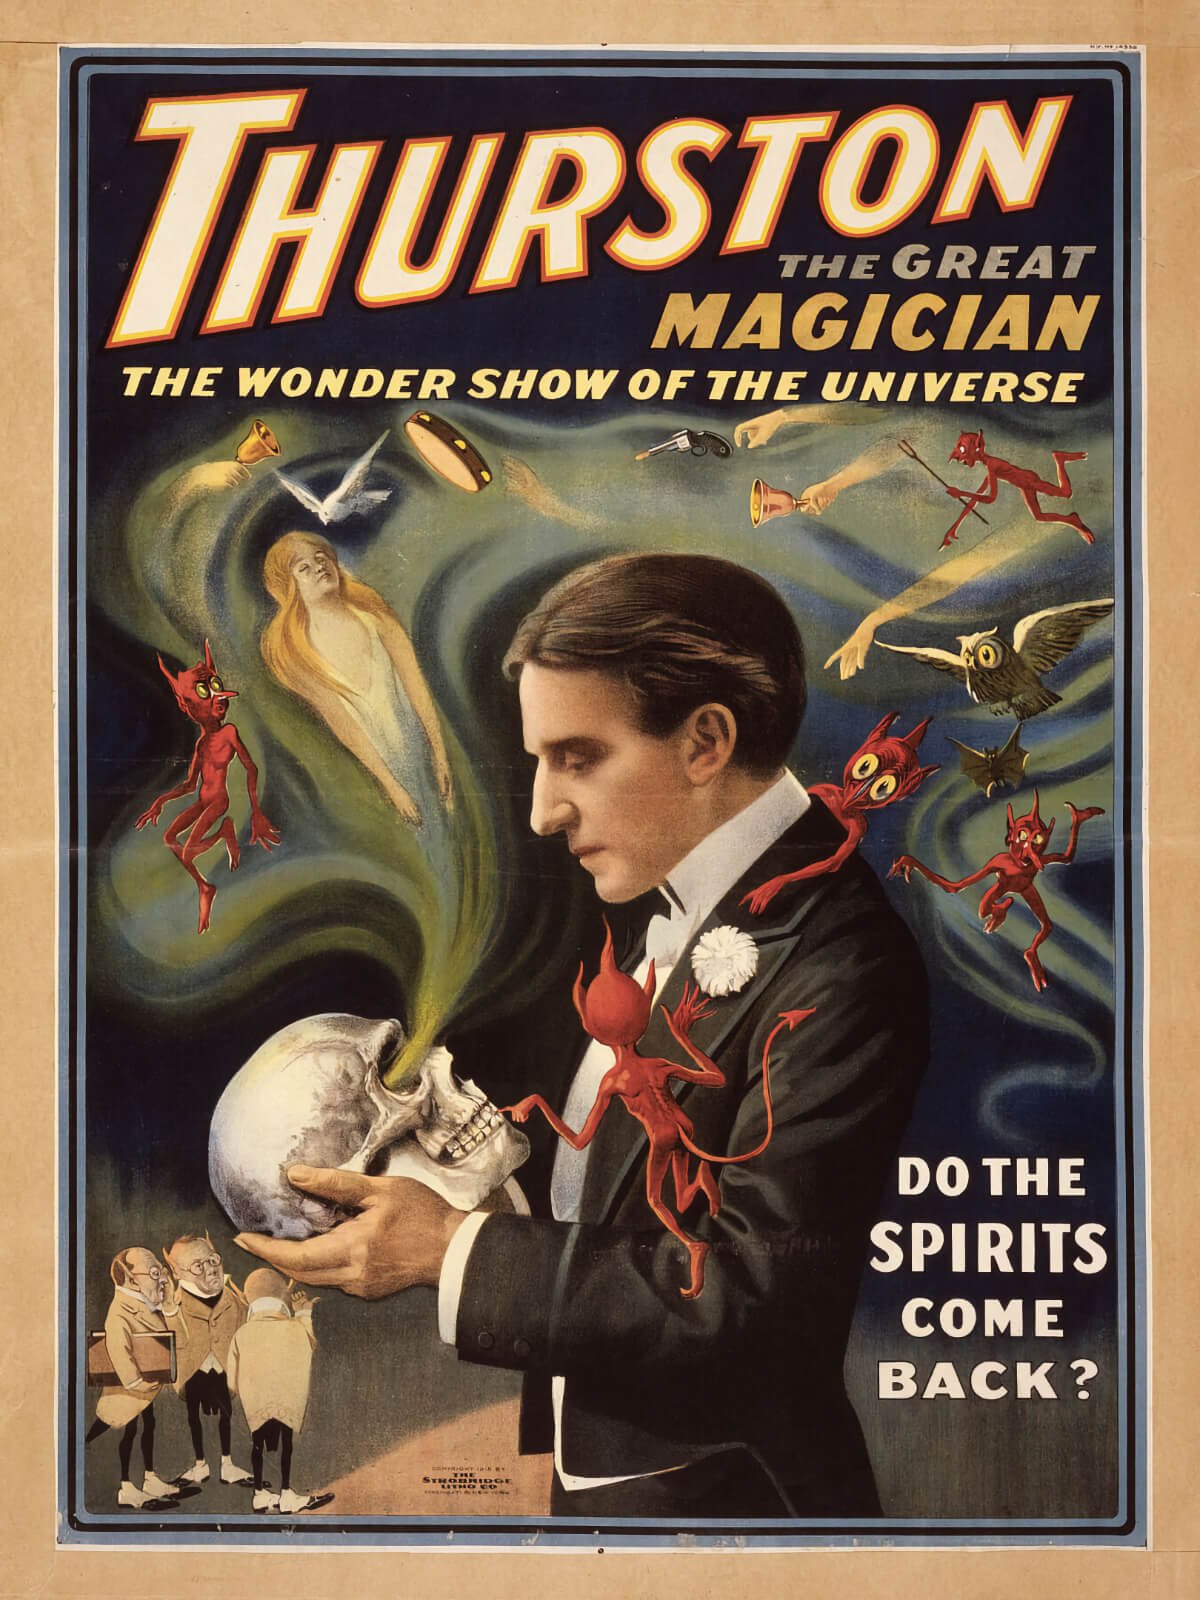 Thurston-the-Great-Magician-the-Wonder-Show-of-the-Universe-c.1914.jpg